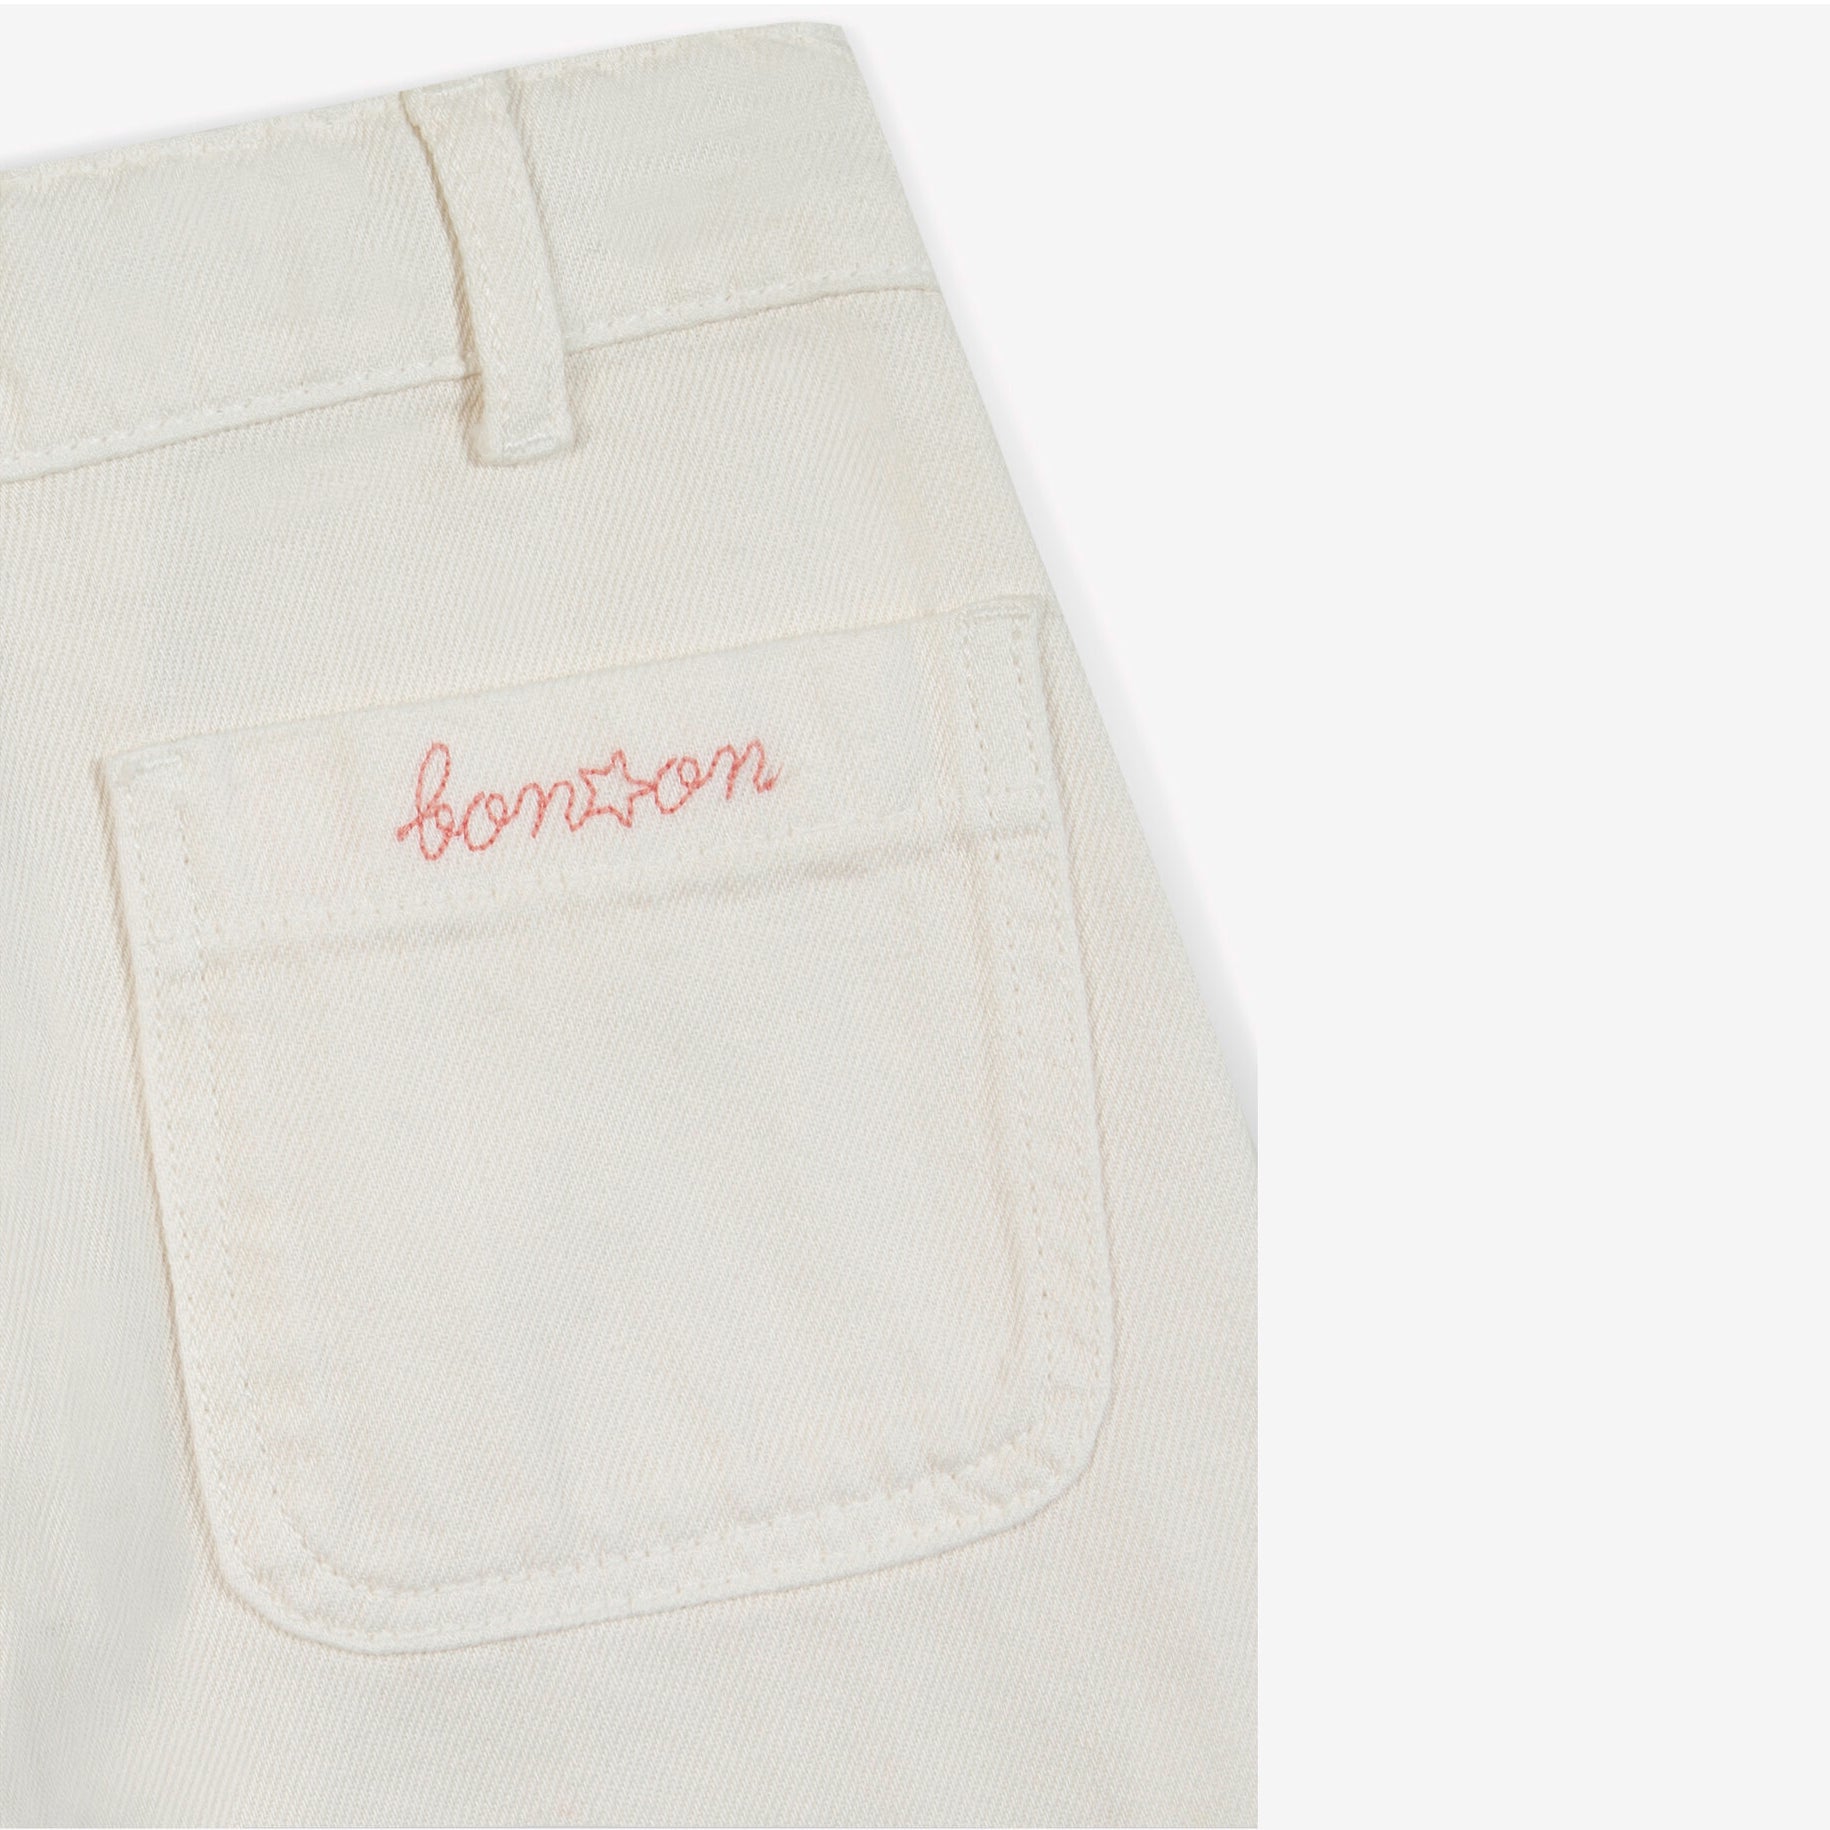 Girls White Cotton Trousers